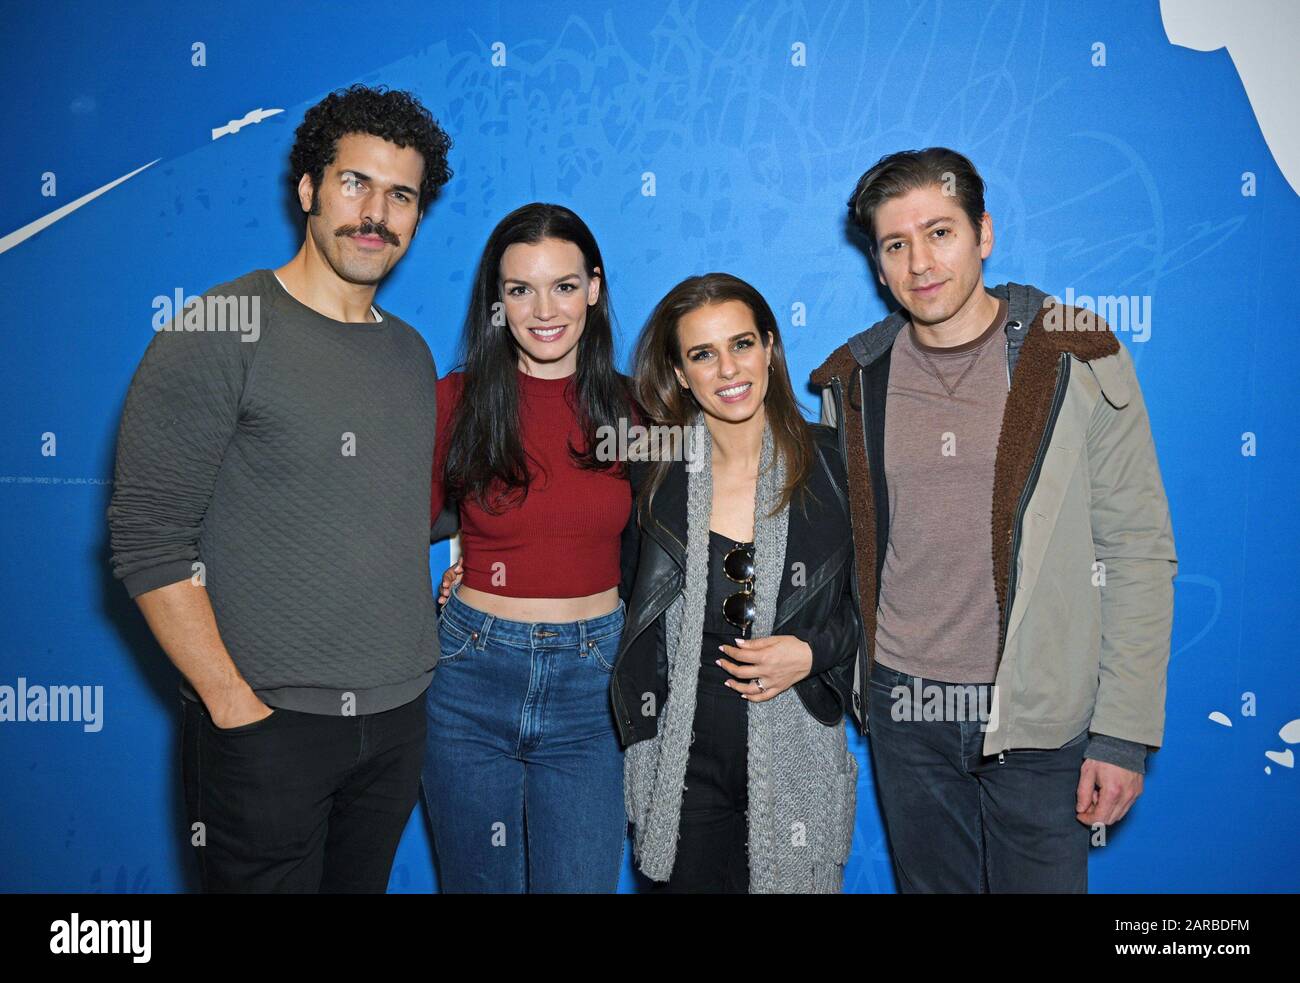 New York, NY, USA. 26th Jan, 2020. Joel Perez, Jennifer Damiano, Ana Nogueira, Michael Zegen in attendance for Bob & Carol & Ted & Alice Cast, Tthe New Group at the Pershing Square Signature Center, New York, NY January 26, 2020. Credit: Derek Storm/Everett Collection/Alamy Live News Stock Photo